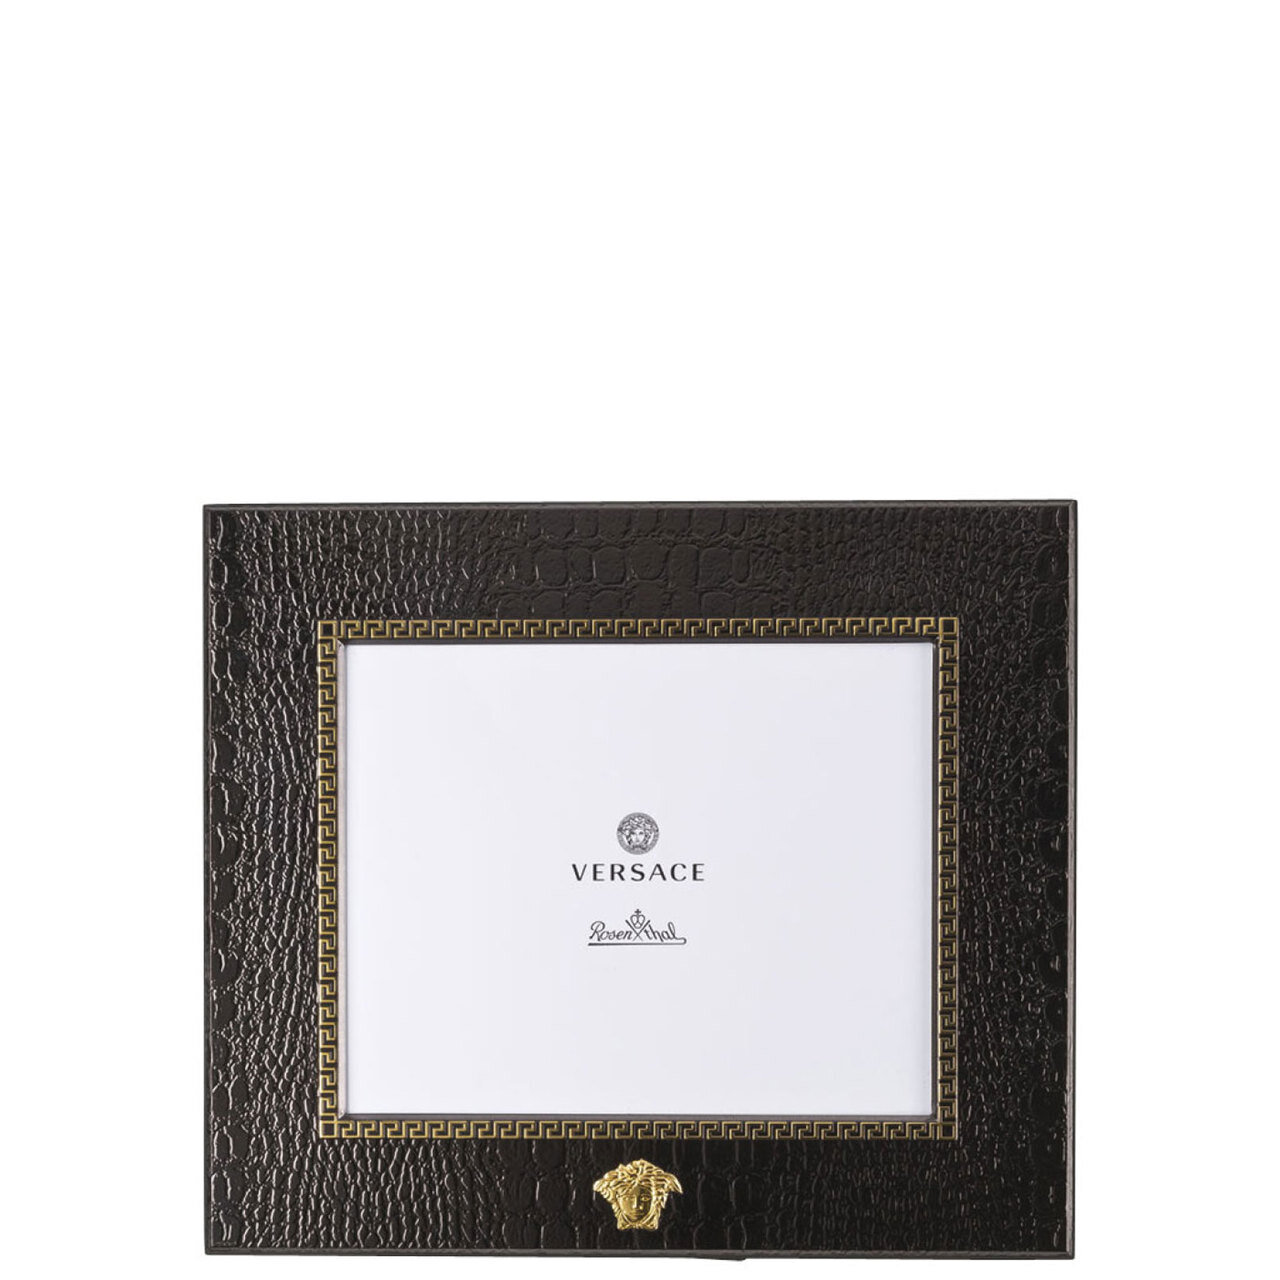 Versace VHF3 Black Picture Frame 8 x 10 Inch